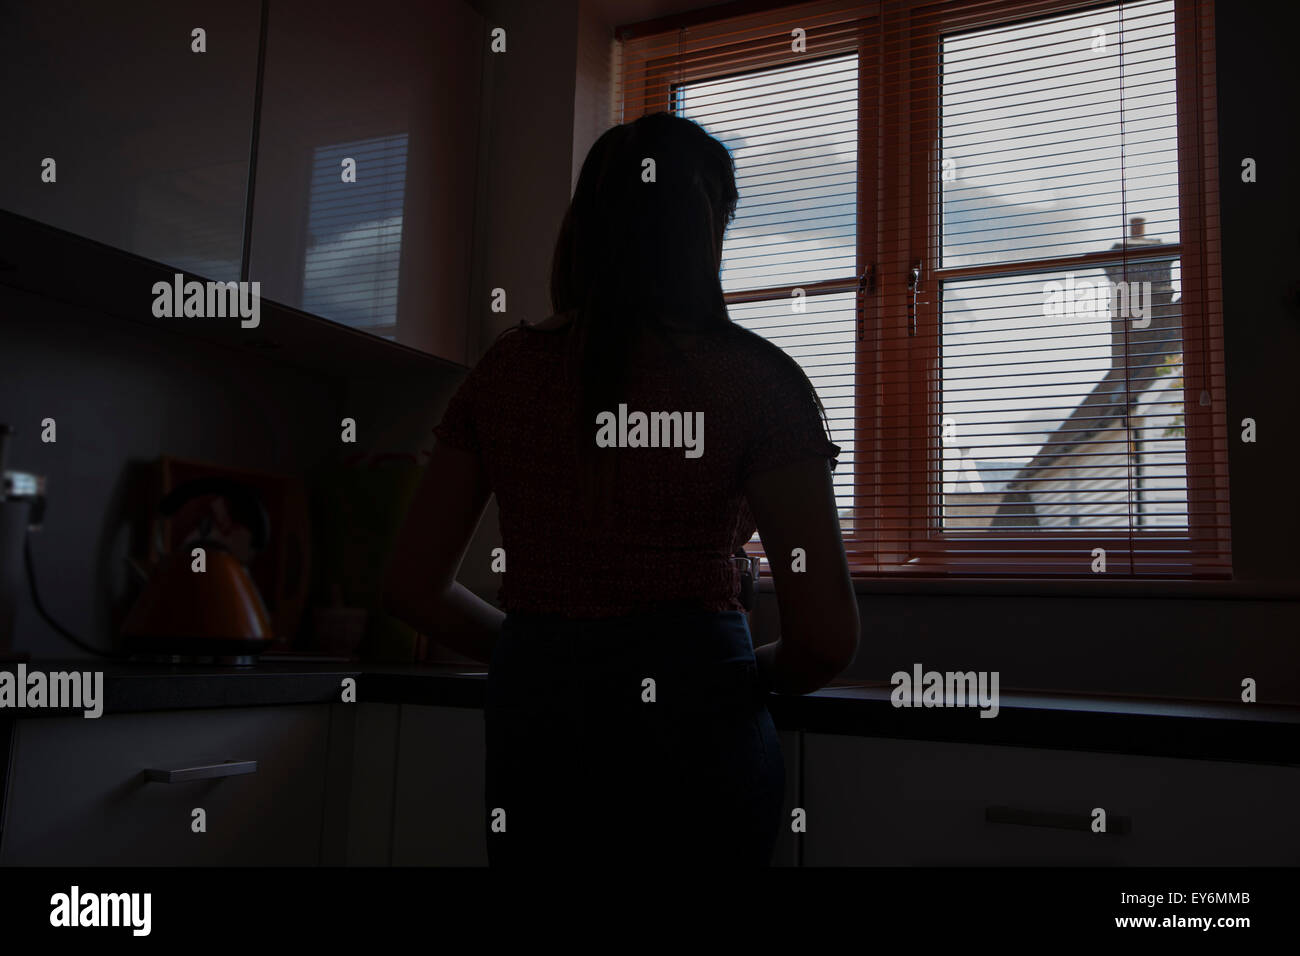 Silhouette of a young woman looking through a window blind, rear viewpoint. Stock Photo